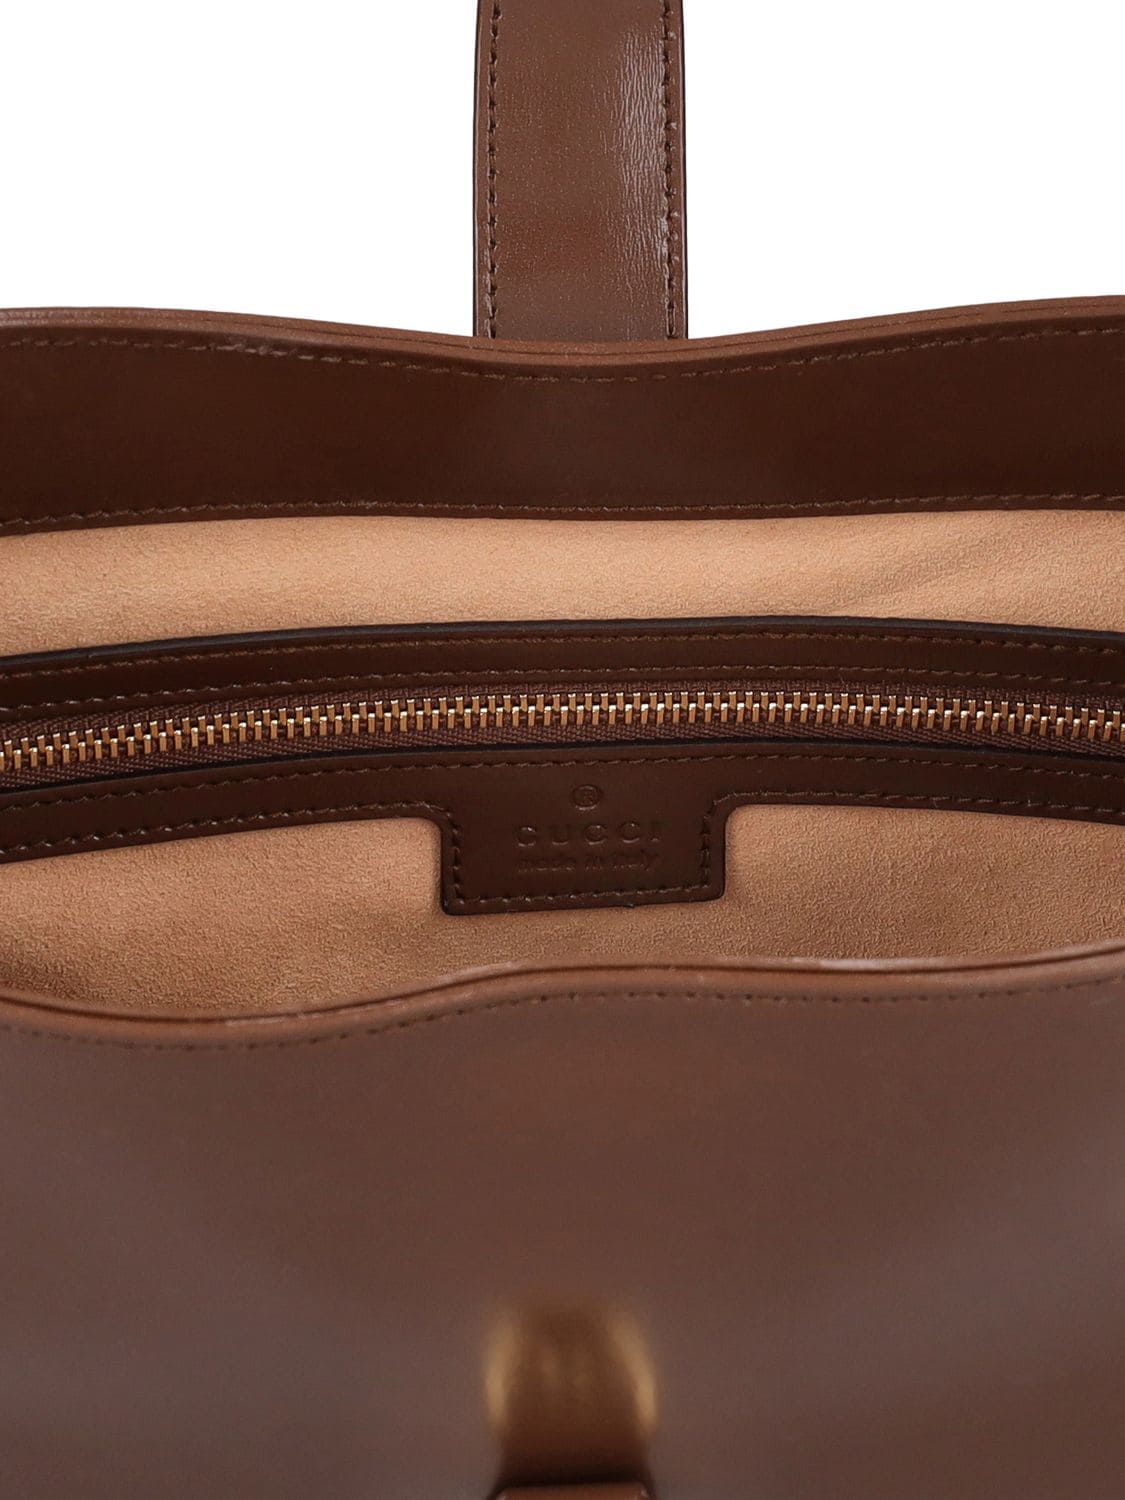 Jackie 1961 small natural grain bag in cuir brown leather